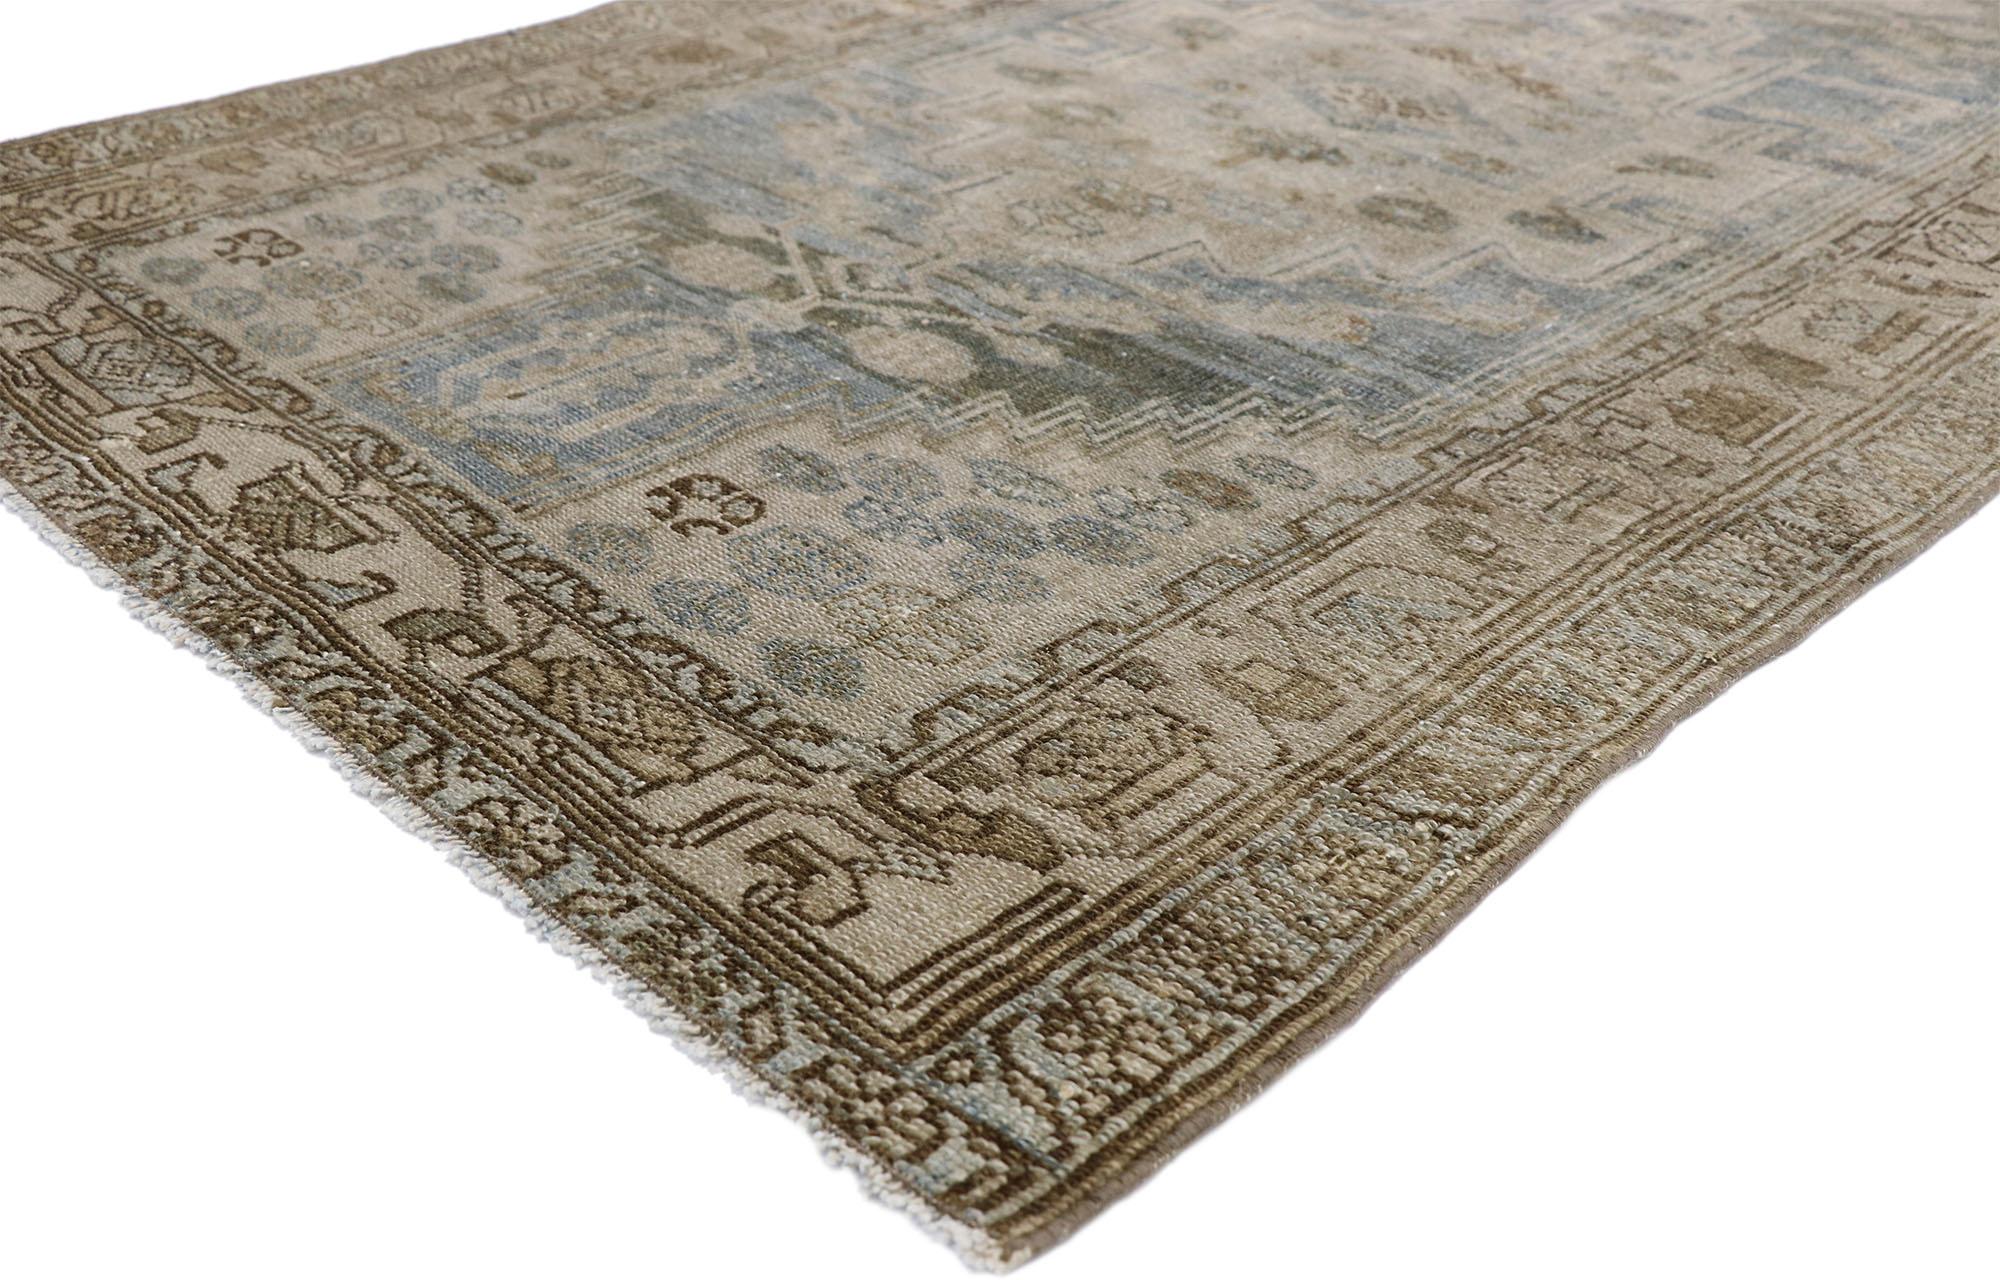 52554, distressed antique Persian Malayer design rug with British Colonial Cottage style. Warm and inviting combined with the right amount of necessary aesthetic elements, this hand knotted wool distressed antique Persian Malayer design rug charms